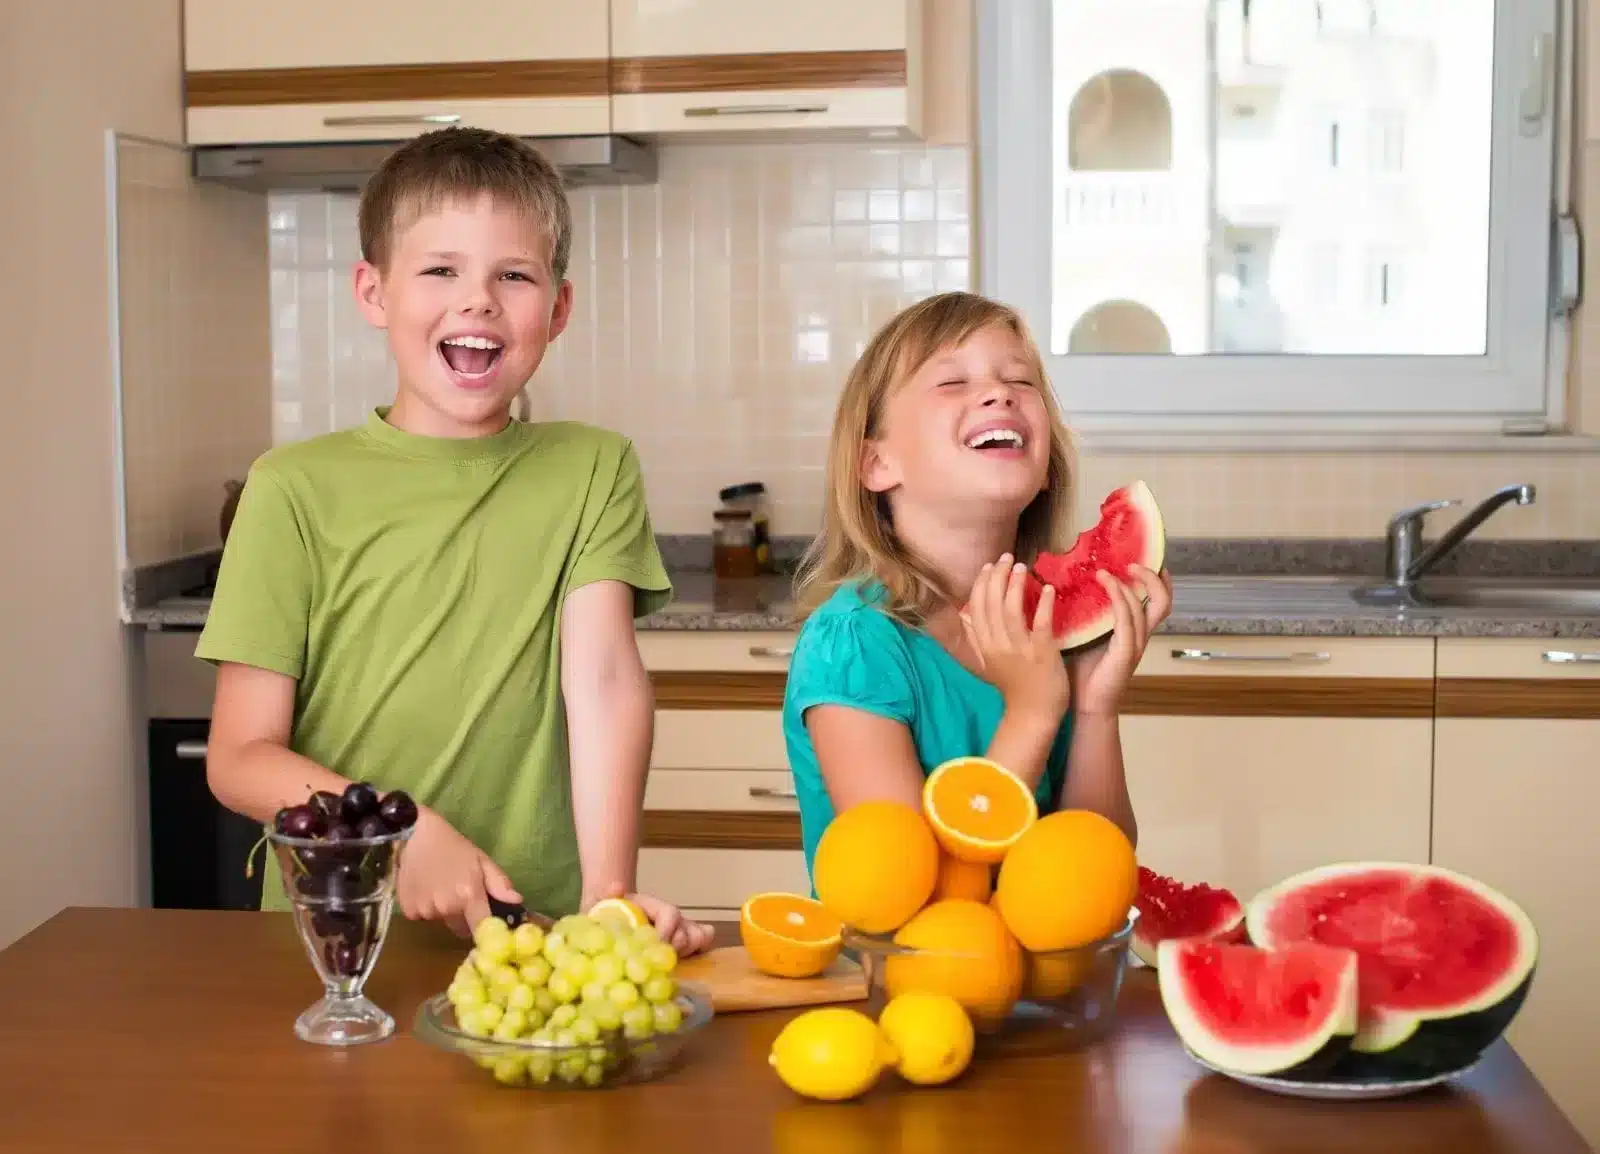 Boy and Girl in Kitchen eating fruit